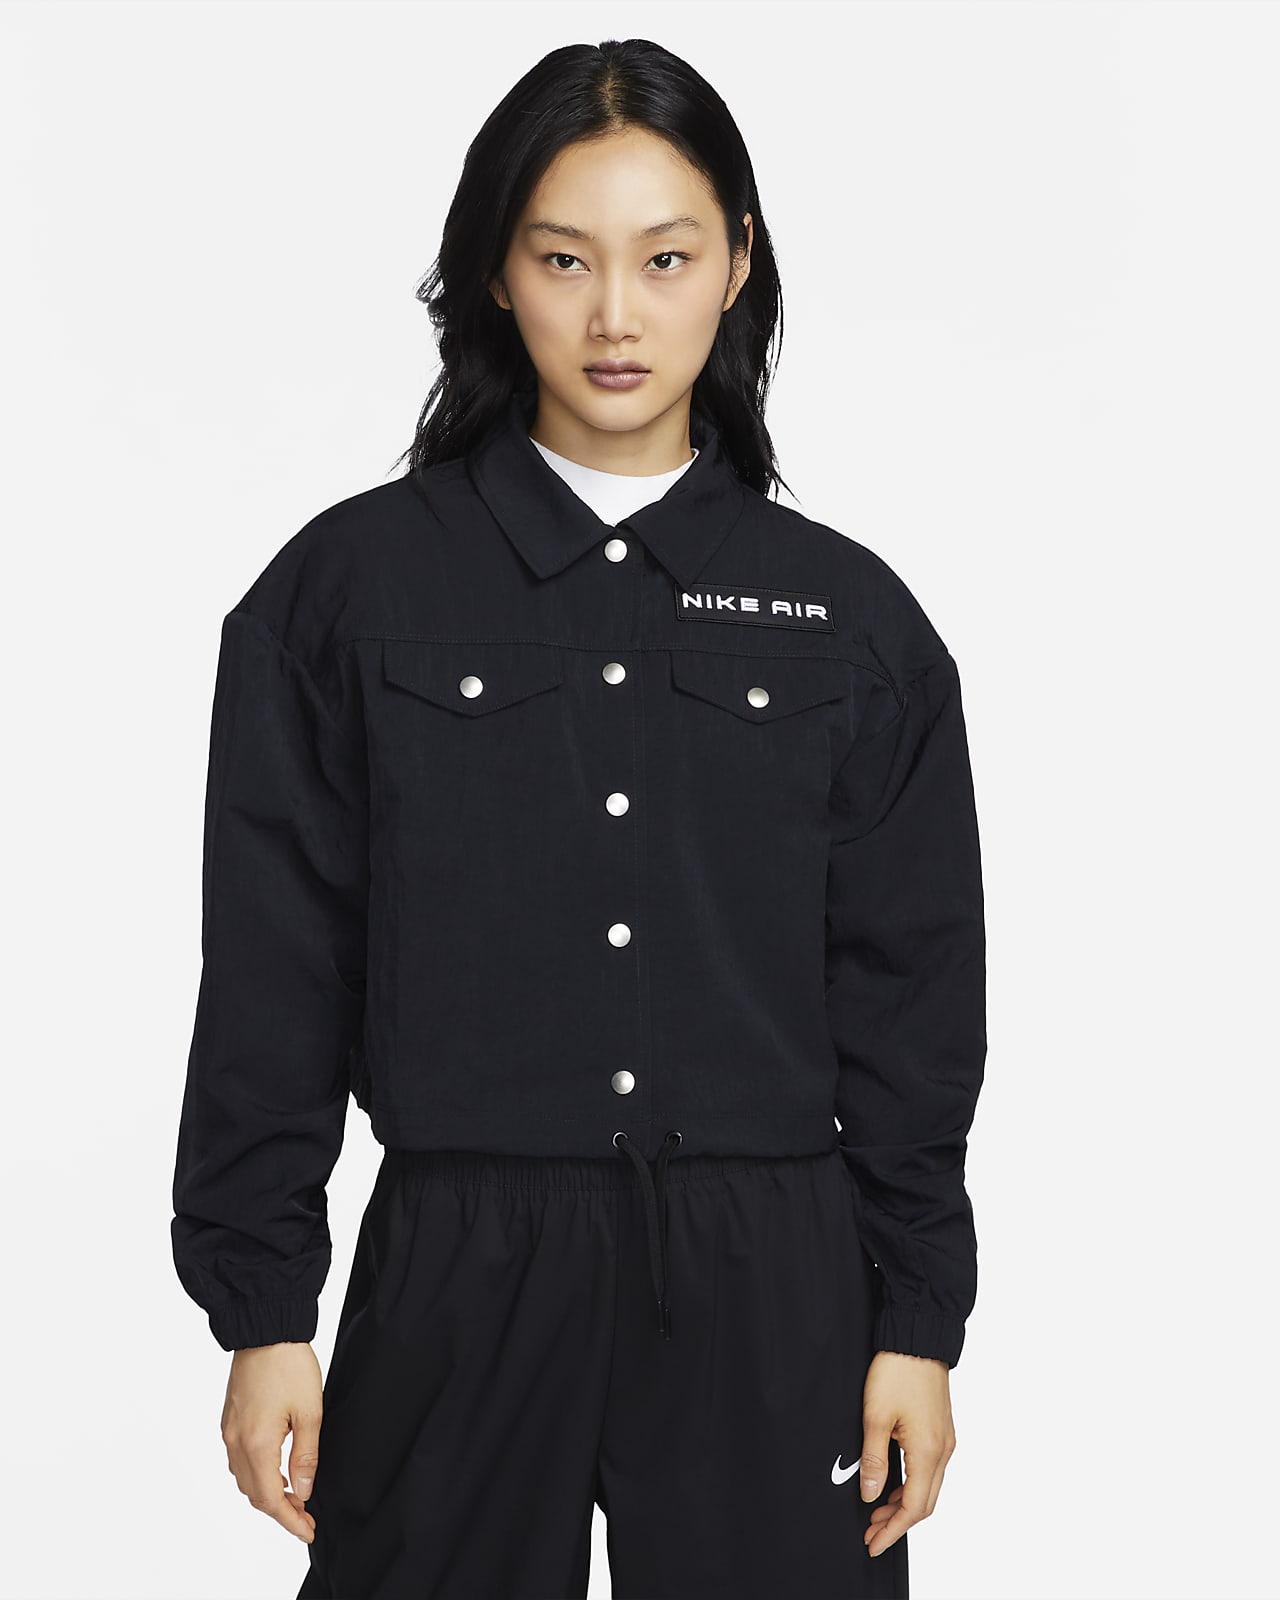 Nike Air Women's Modest Cropped Woven Jacket